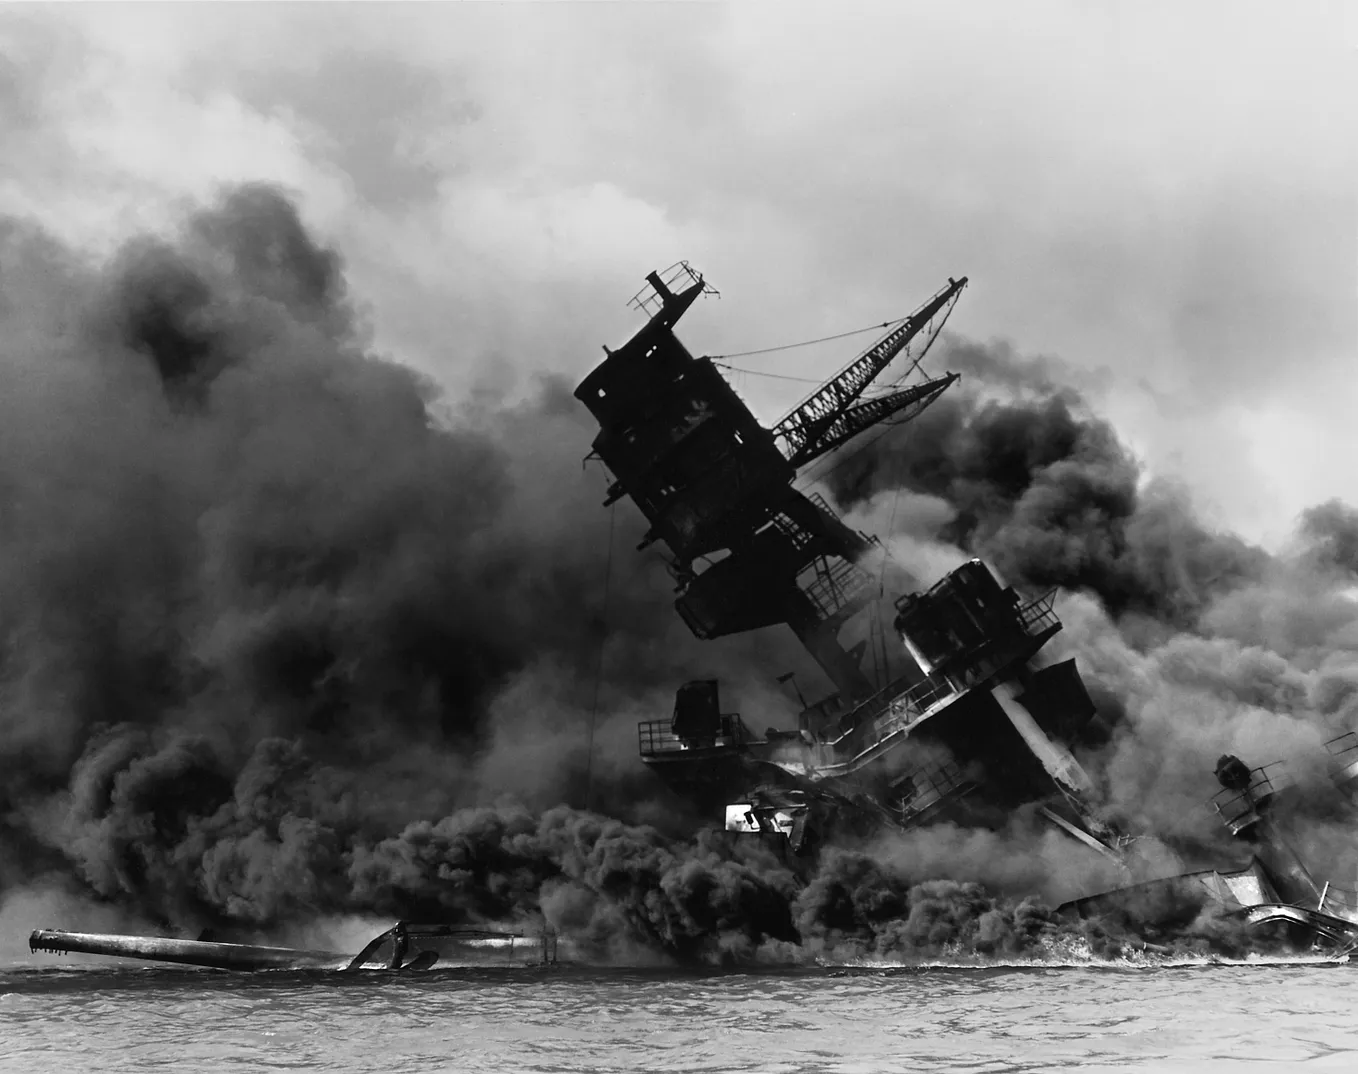 Bite-Size History #4 — A Day of Infamy. Could the 1941 attack on Pearl Harbor have been avoided?